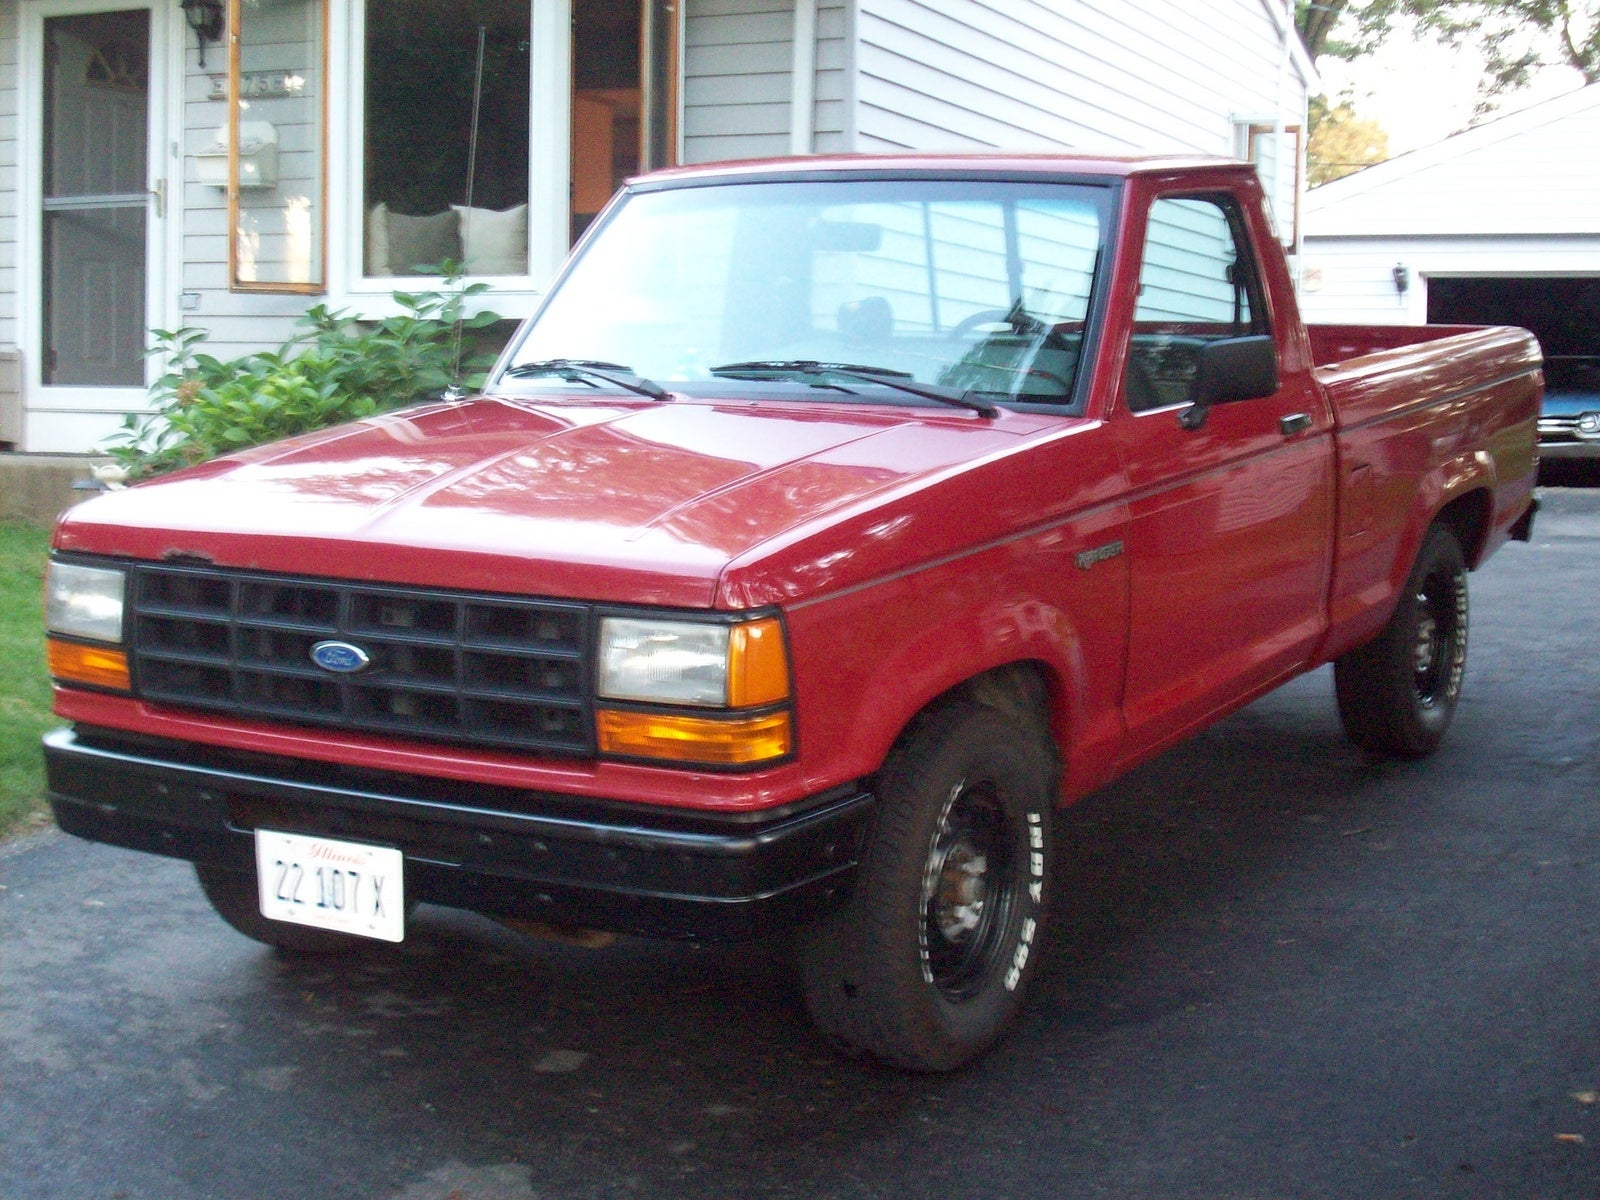 Used 1989 ford ranger parts #4